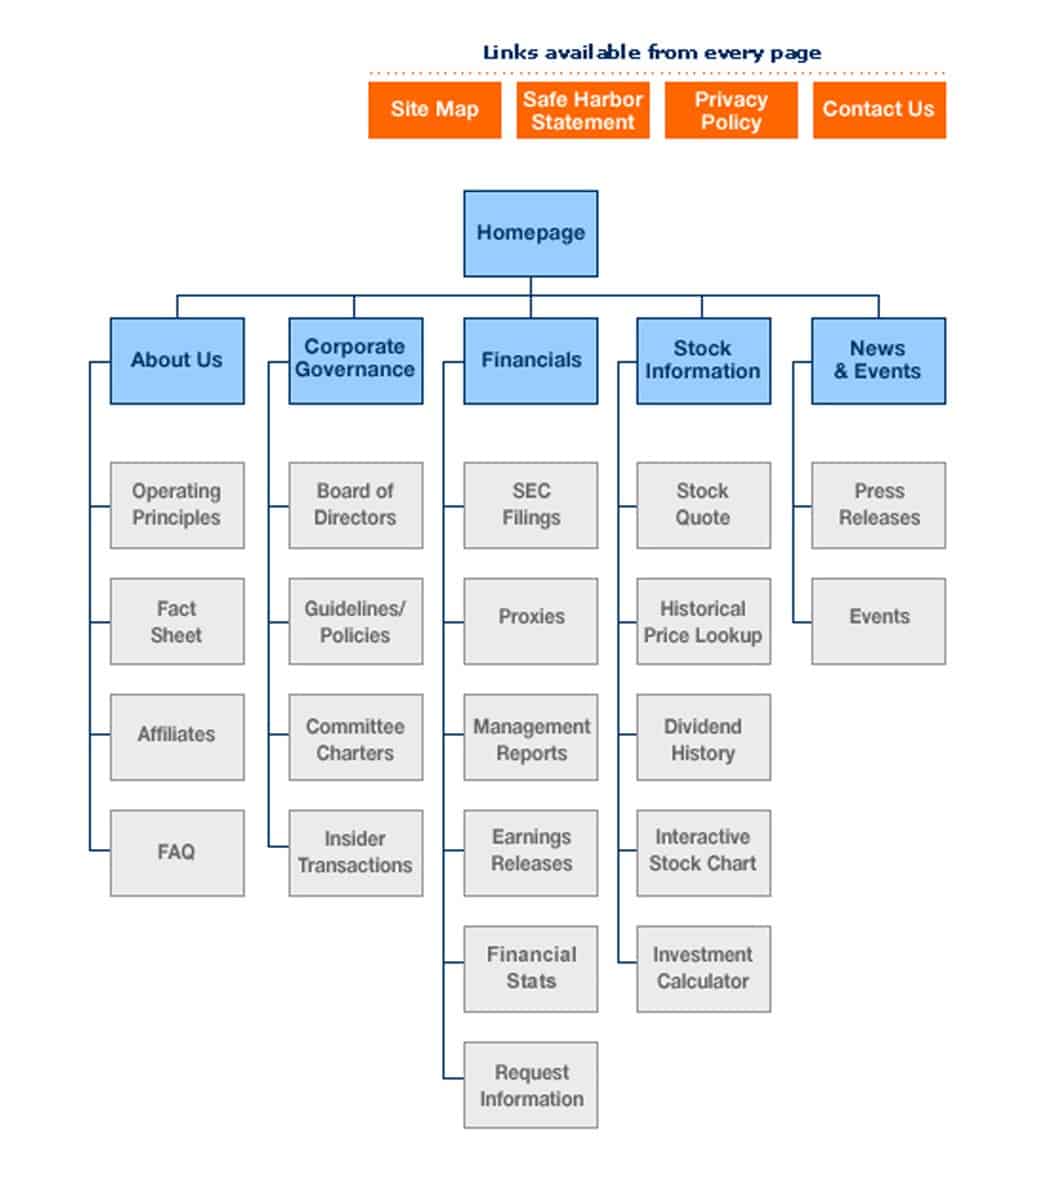 Example of a sitemap